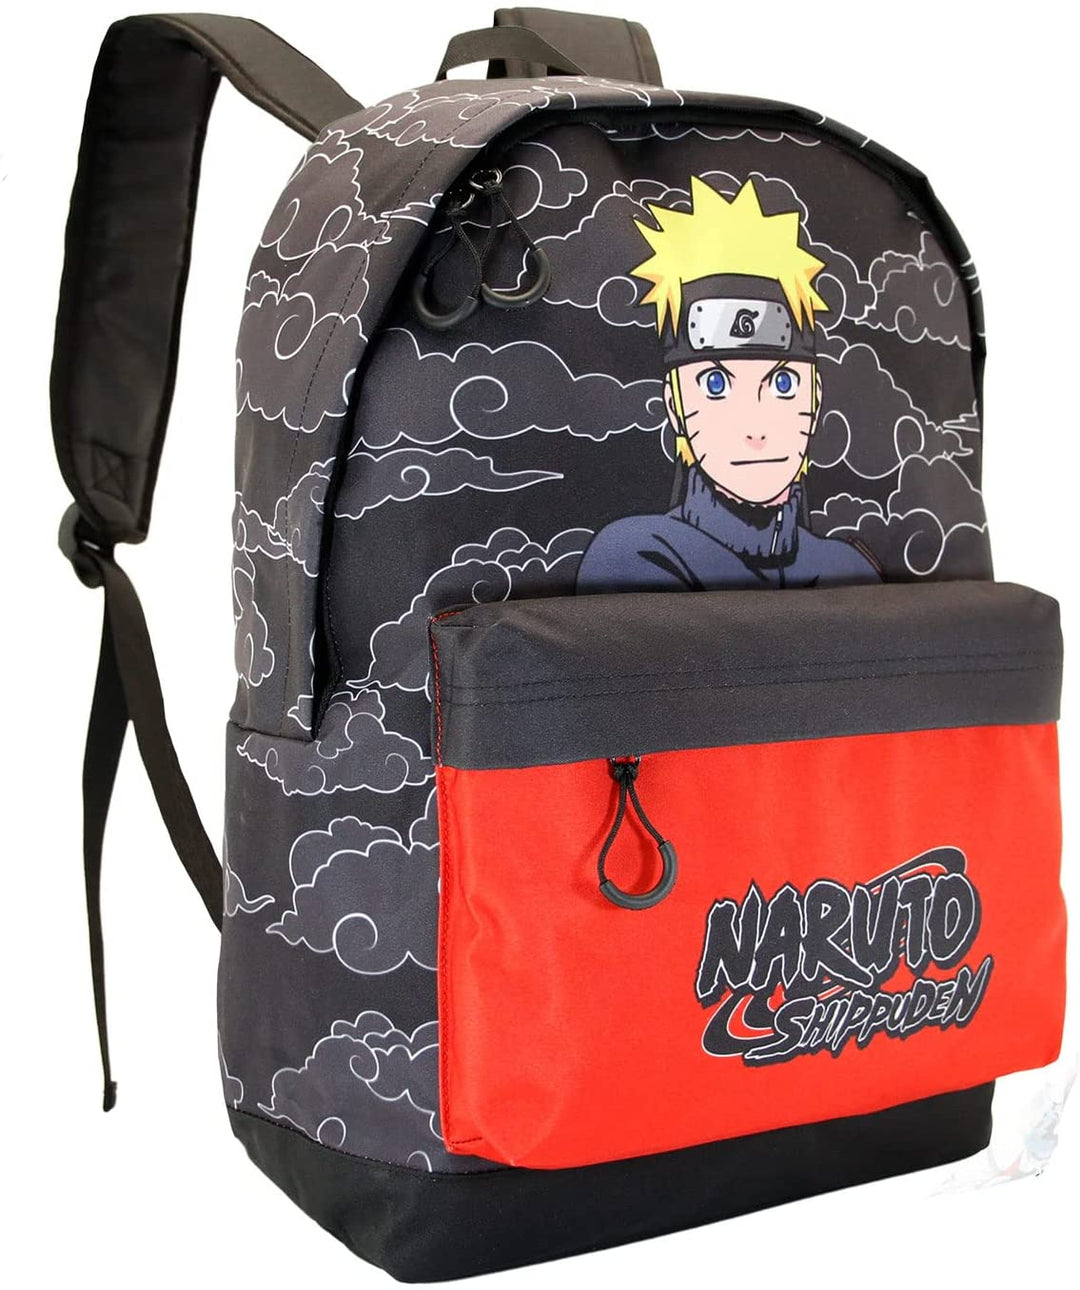 Naruto Clouds-Fan HS Backpack, Black